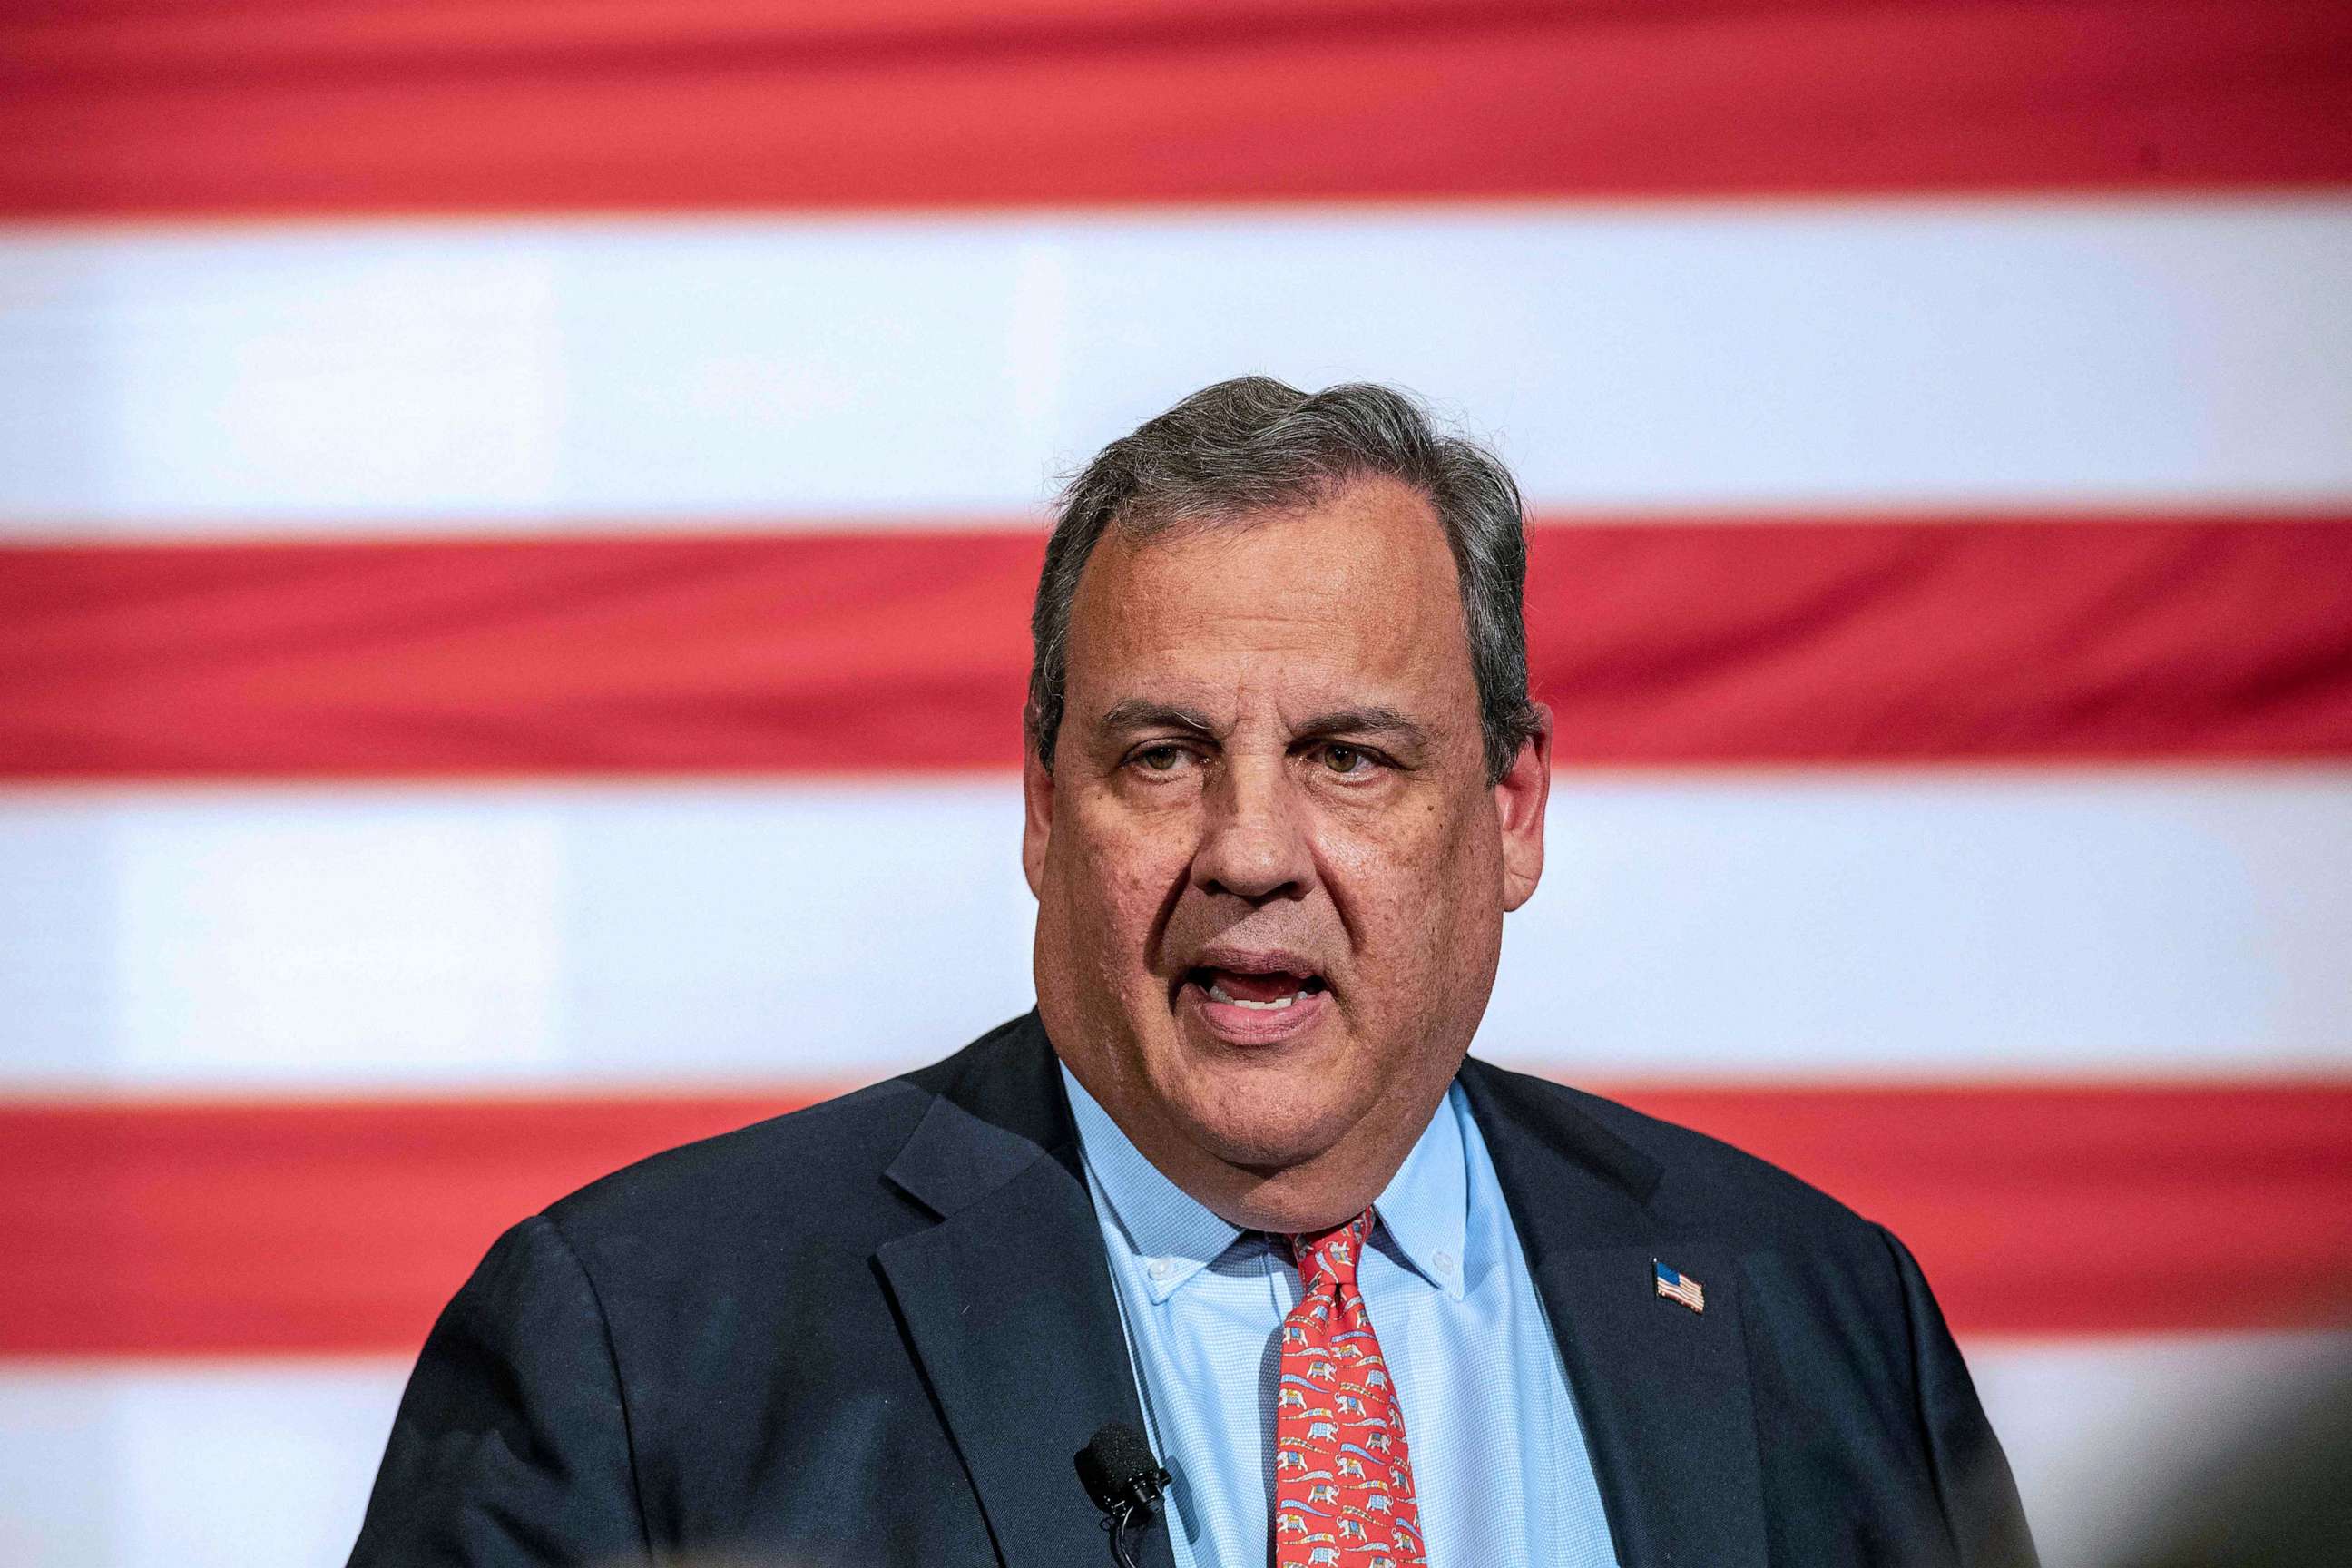 Chris Christie launches 2024 bid Choose 'big' over 'small,' he says